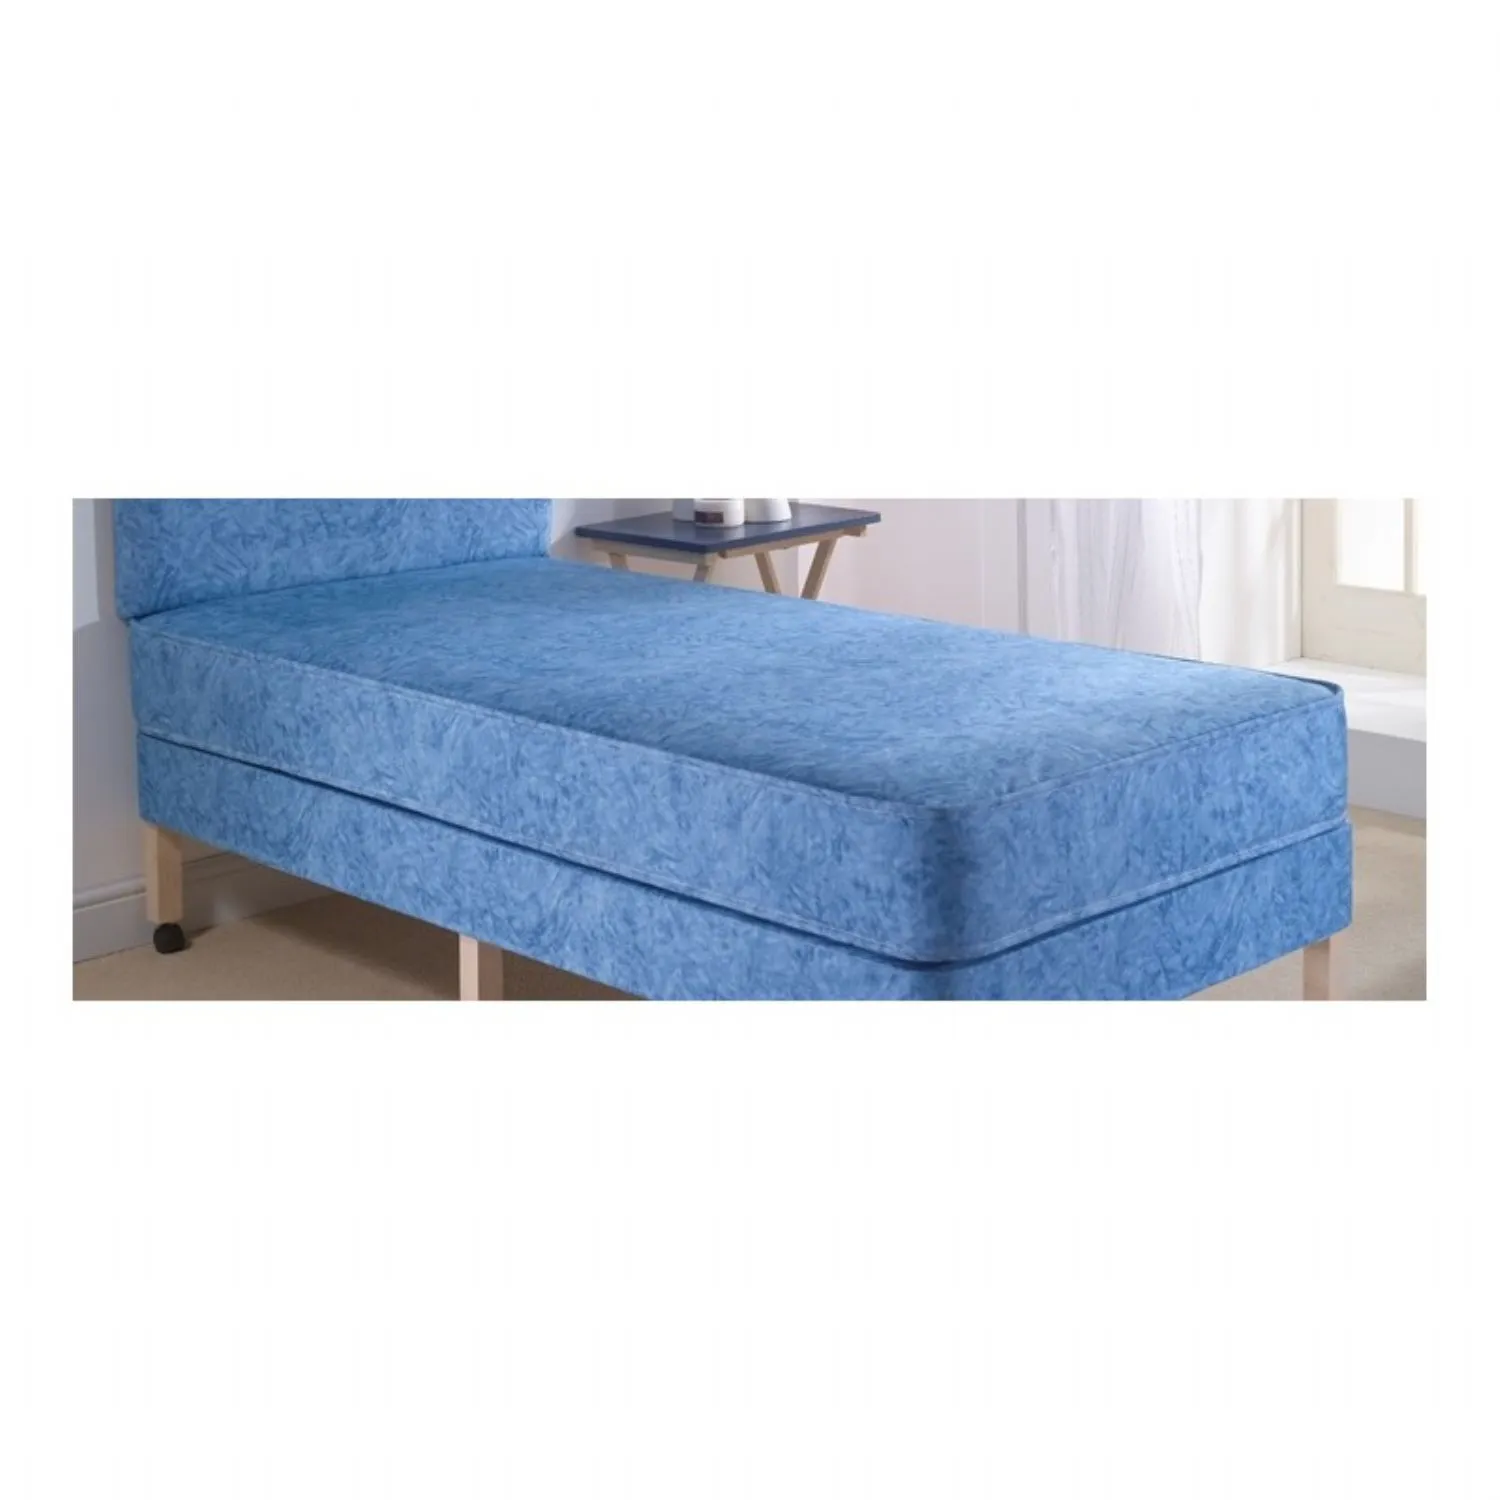 Contract Aqua Ortho Lux MB245 Extra Firm Framed Spring Mattresses